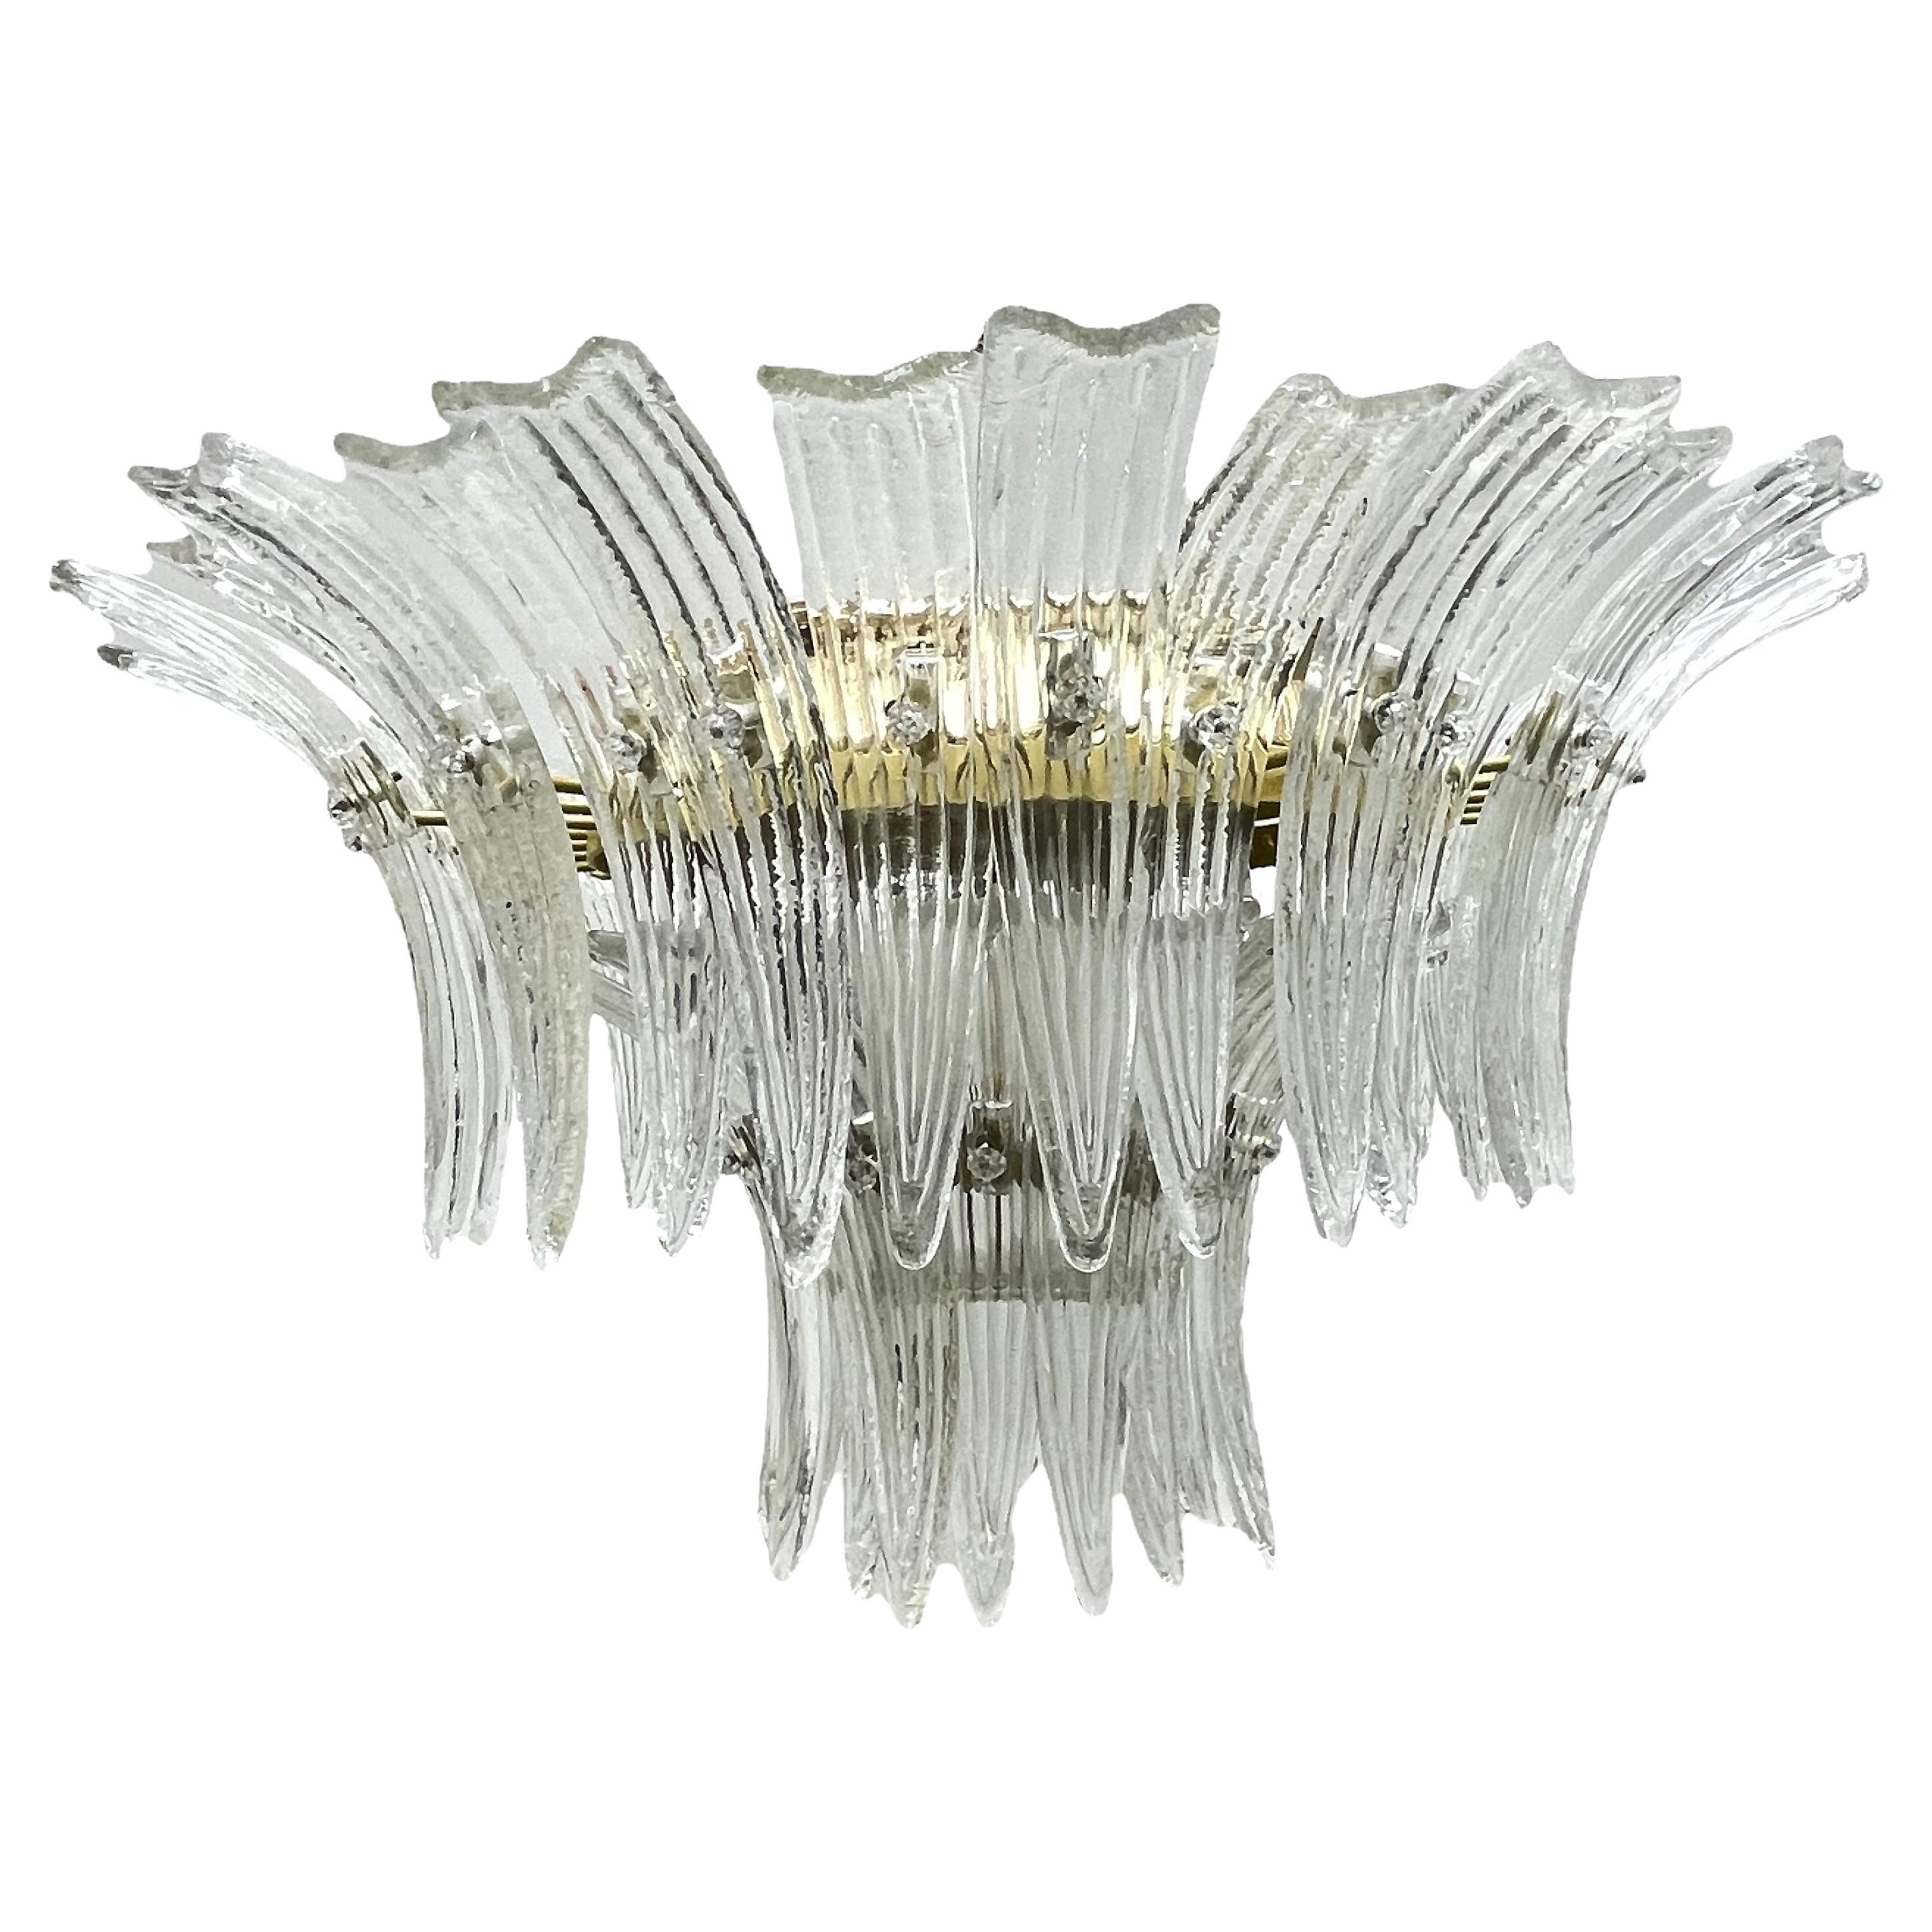 Very elegant, vintage estate, midcentury Venetian Murano art glass chandelier features 2 round tiers of overlapping, large, curved, hand-blown clear palm leaves frosted in the 